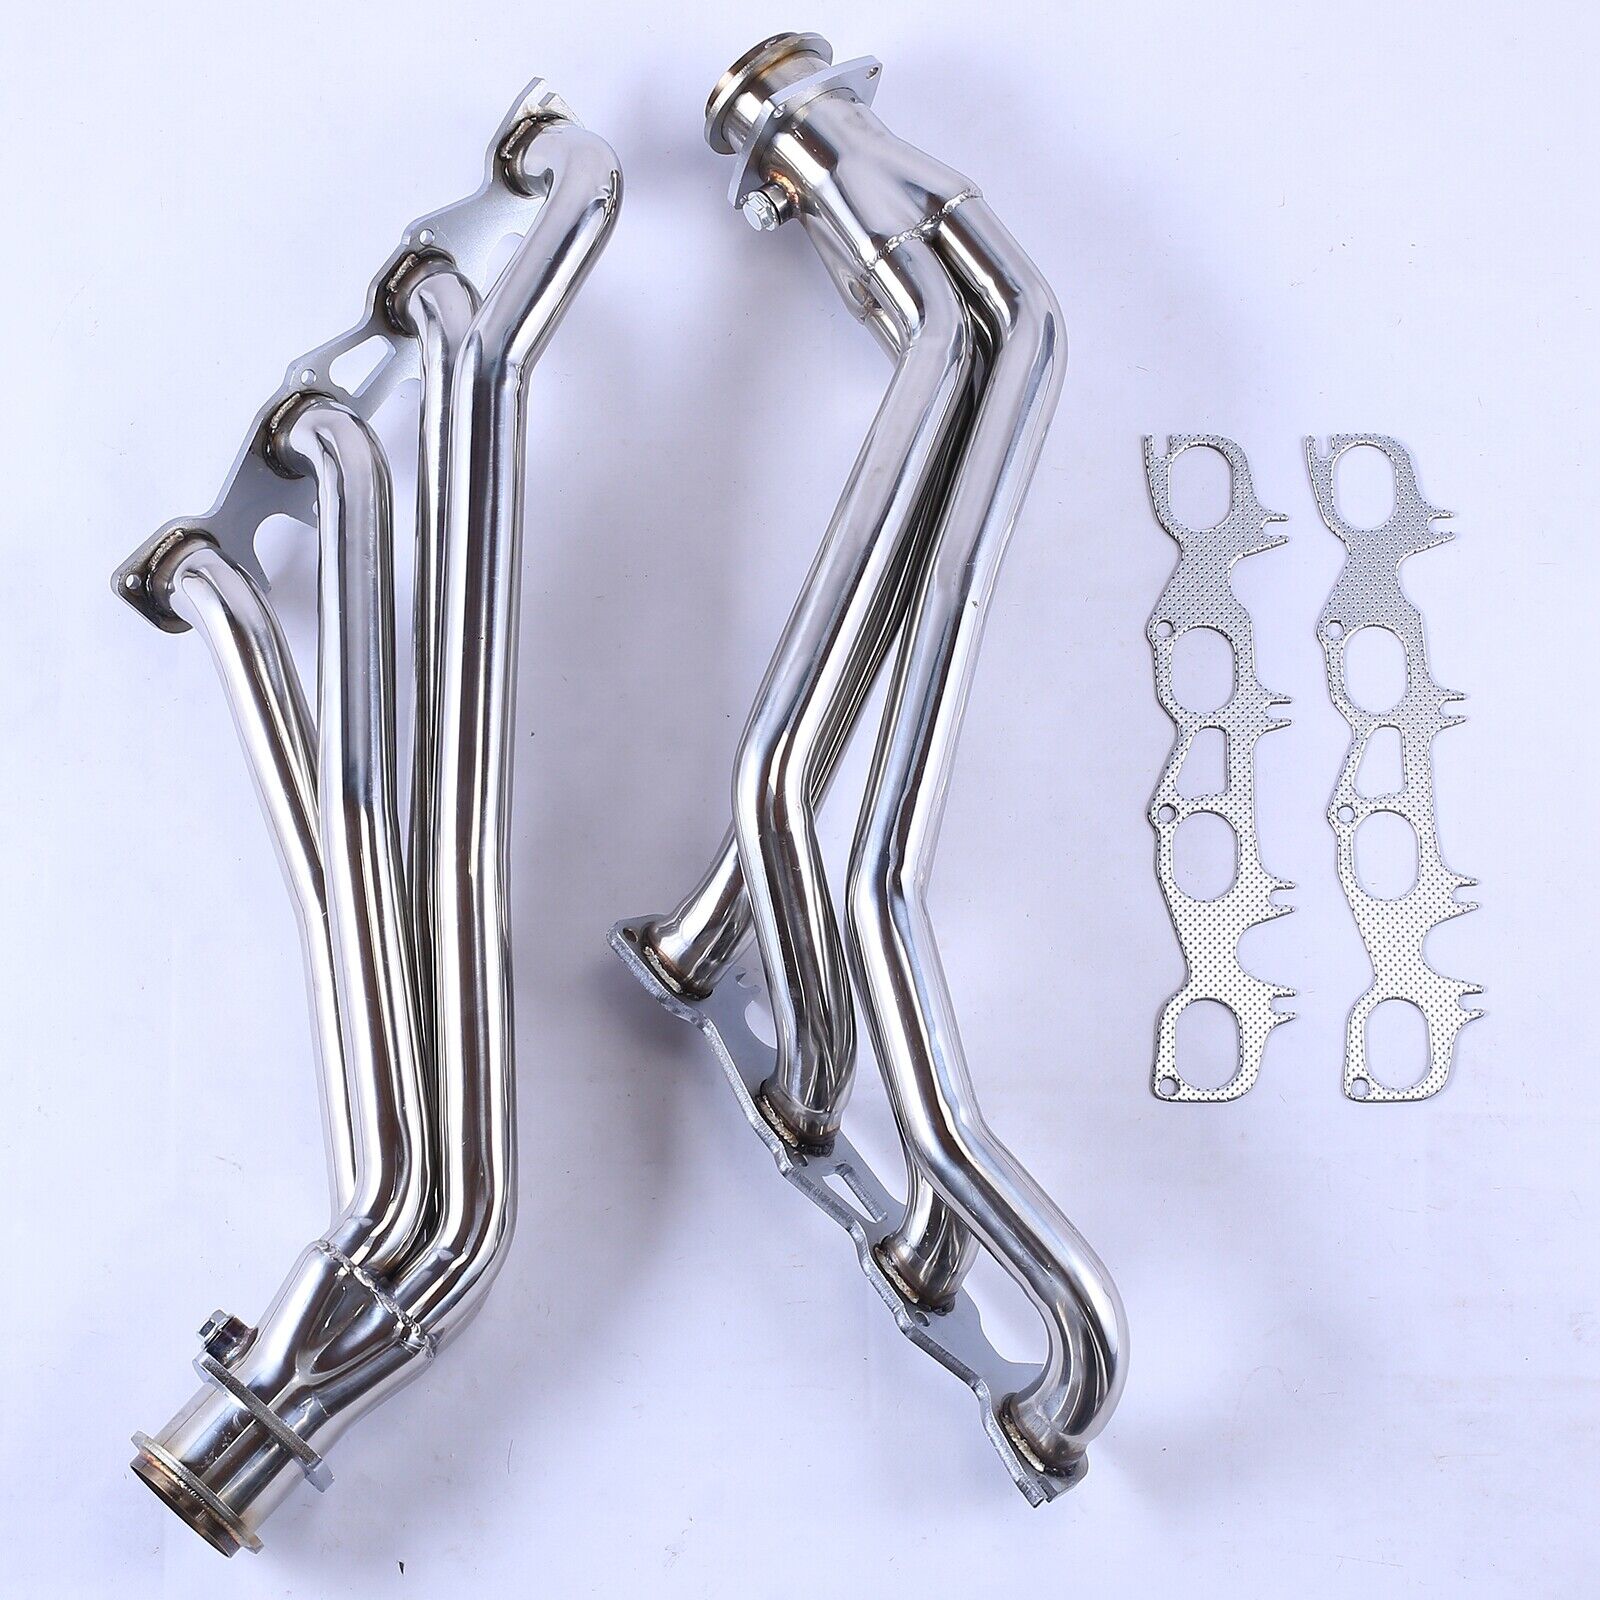 Stainless Exhaust Hearder For Chrysler 300C Dodge Charger Magnum Challenger 5.7L